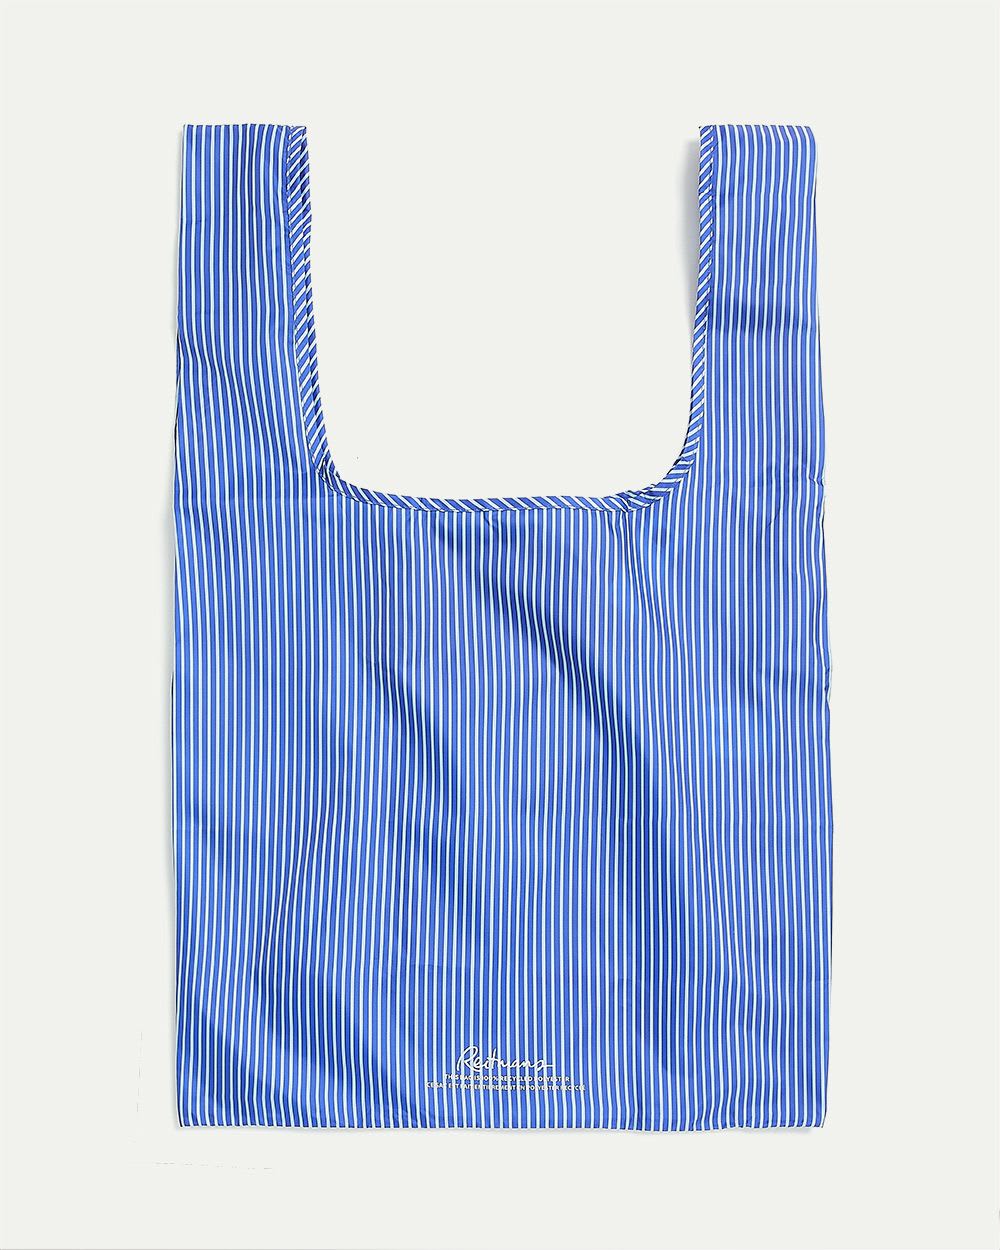 Recycled Polyester Shopping Bag